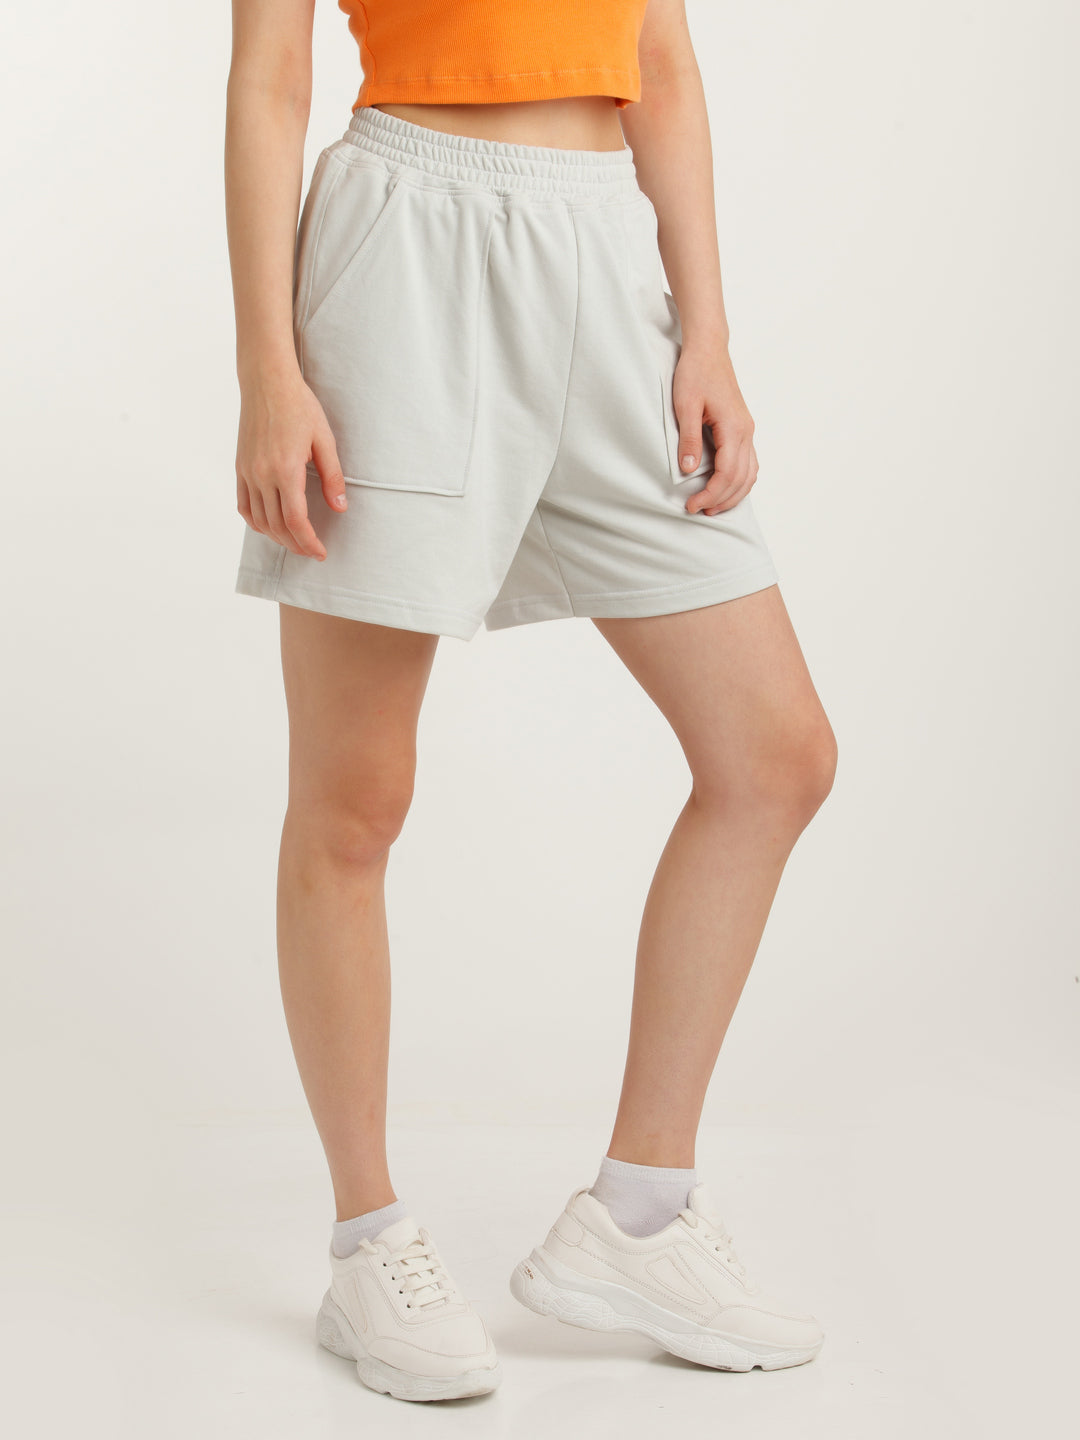 Blue Solid Elasticated Shorts For Women